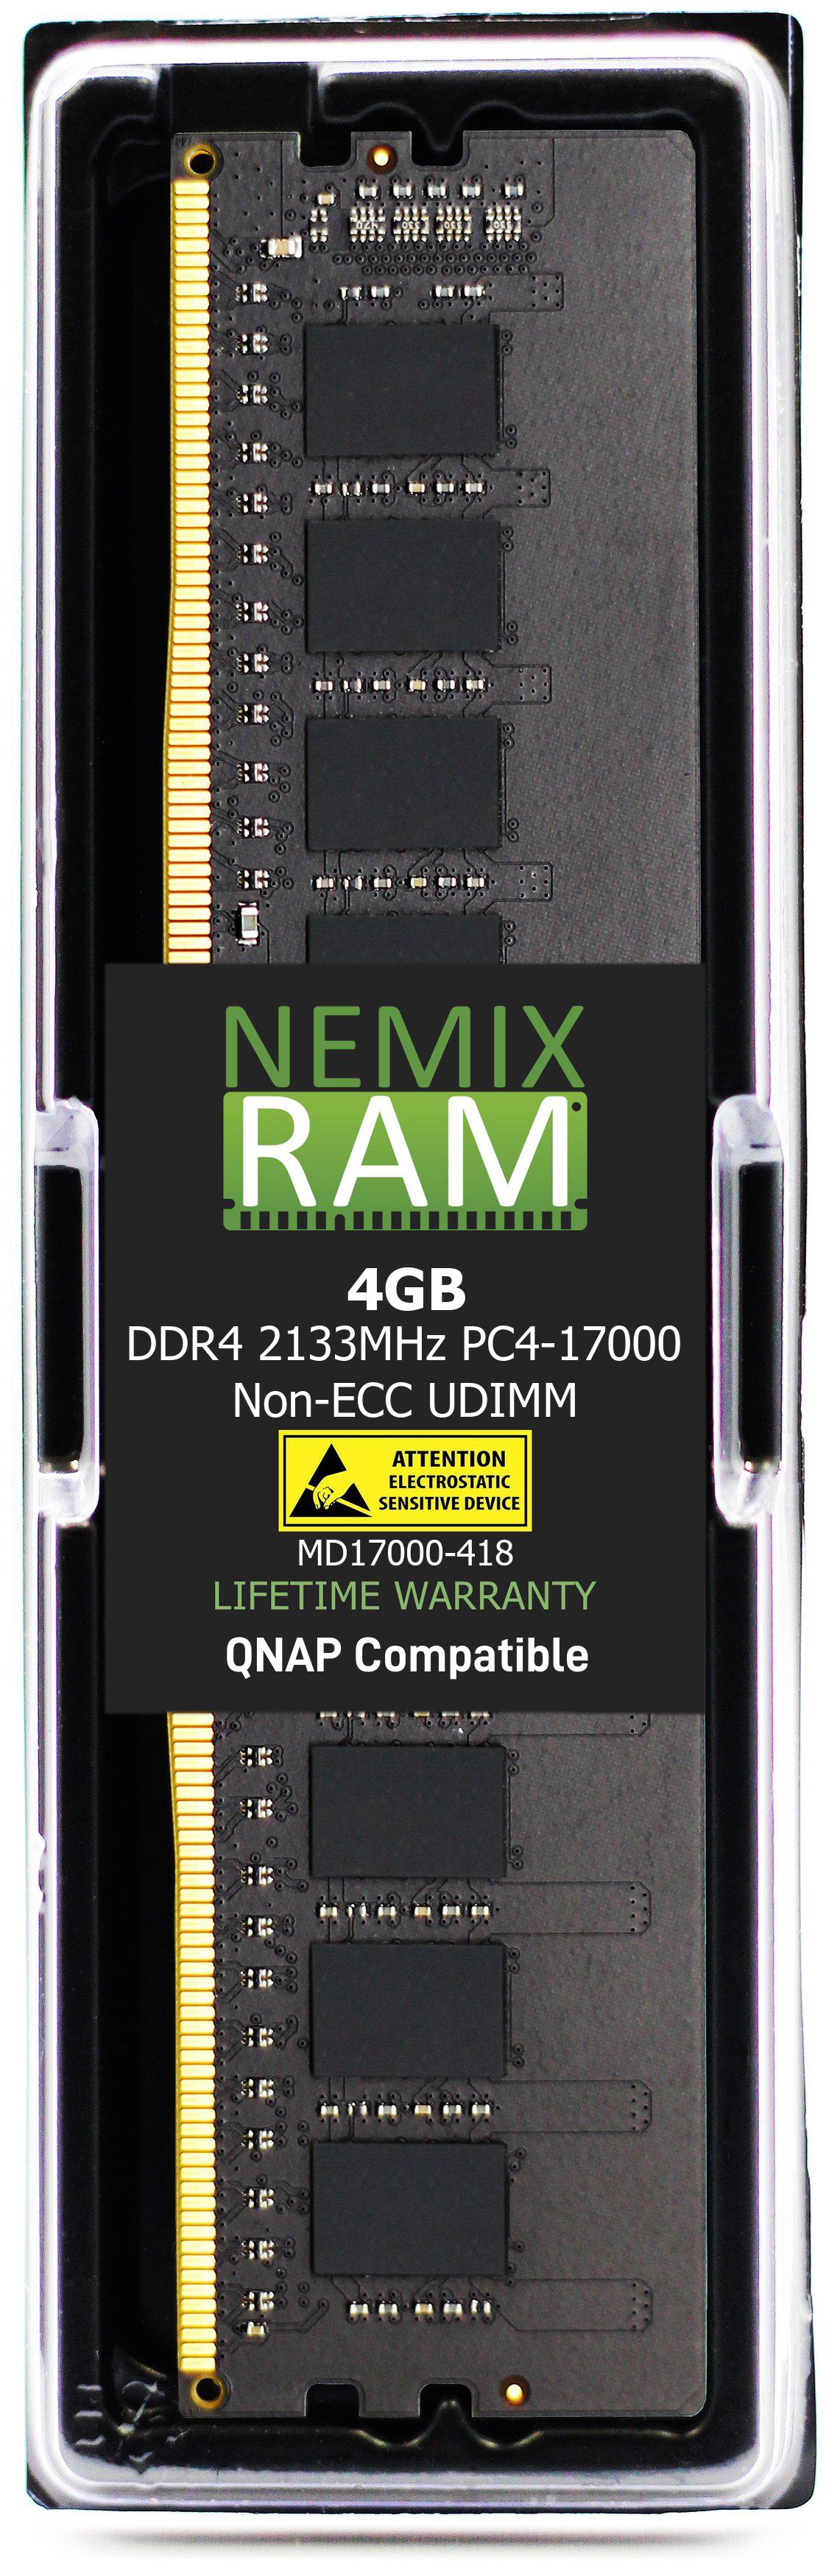 QNAP RAM-4GDR4-LD-2133 4GB DDR4 2133MHz PC4-17000 UDIMM 1Rx8 Compatible Memory